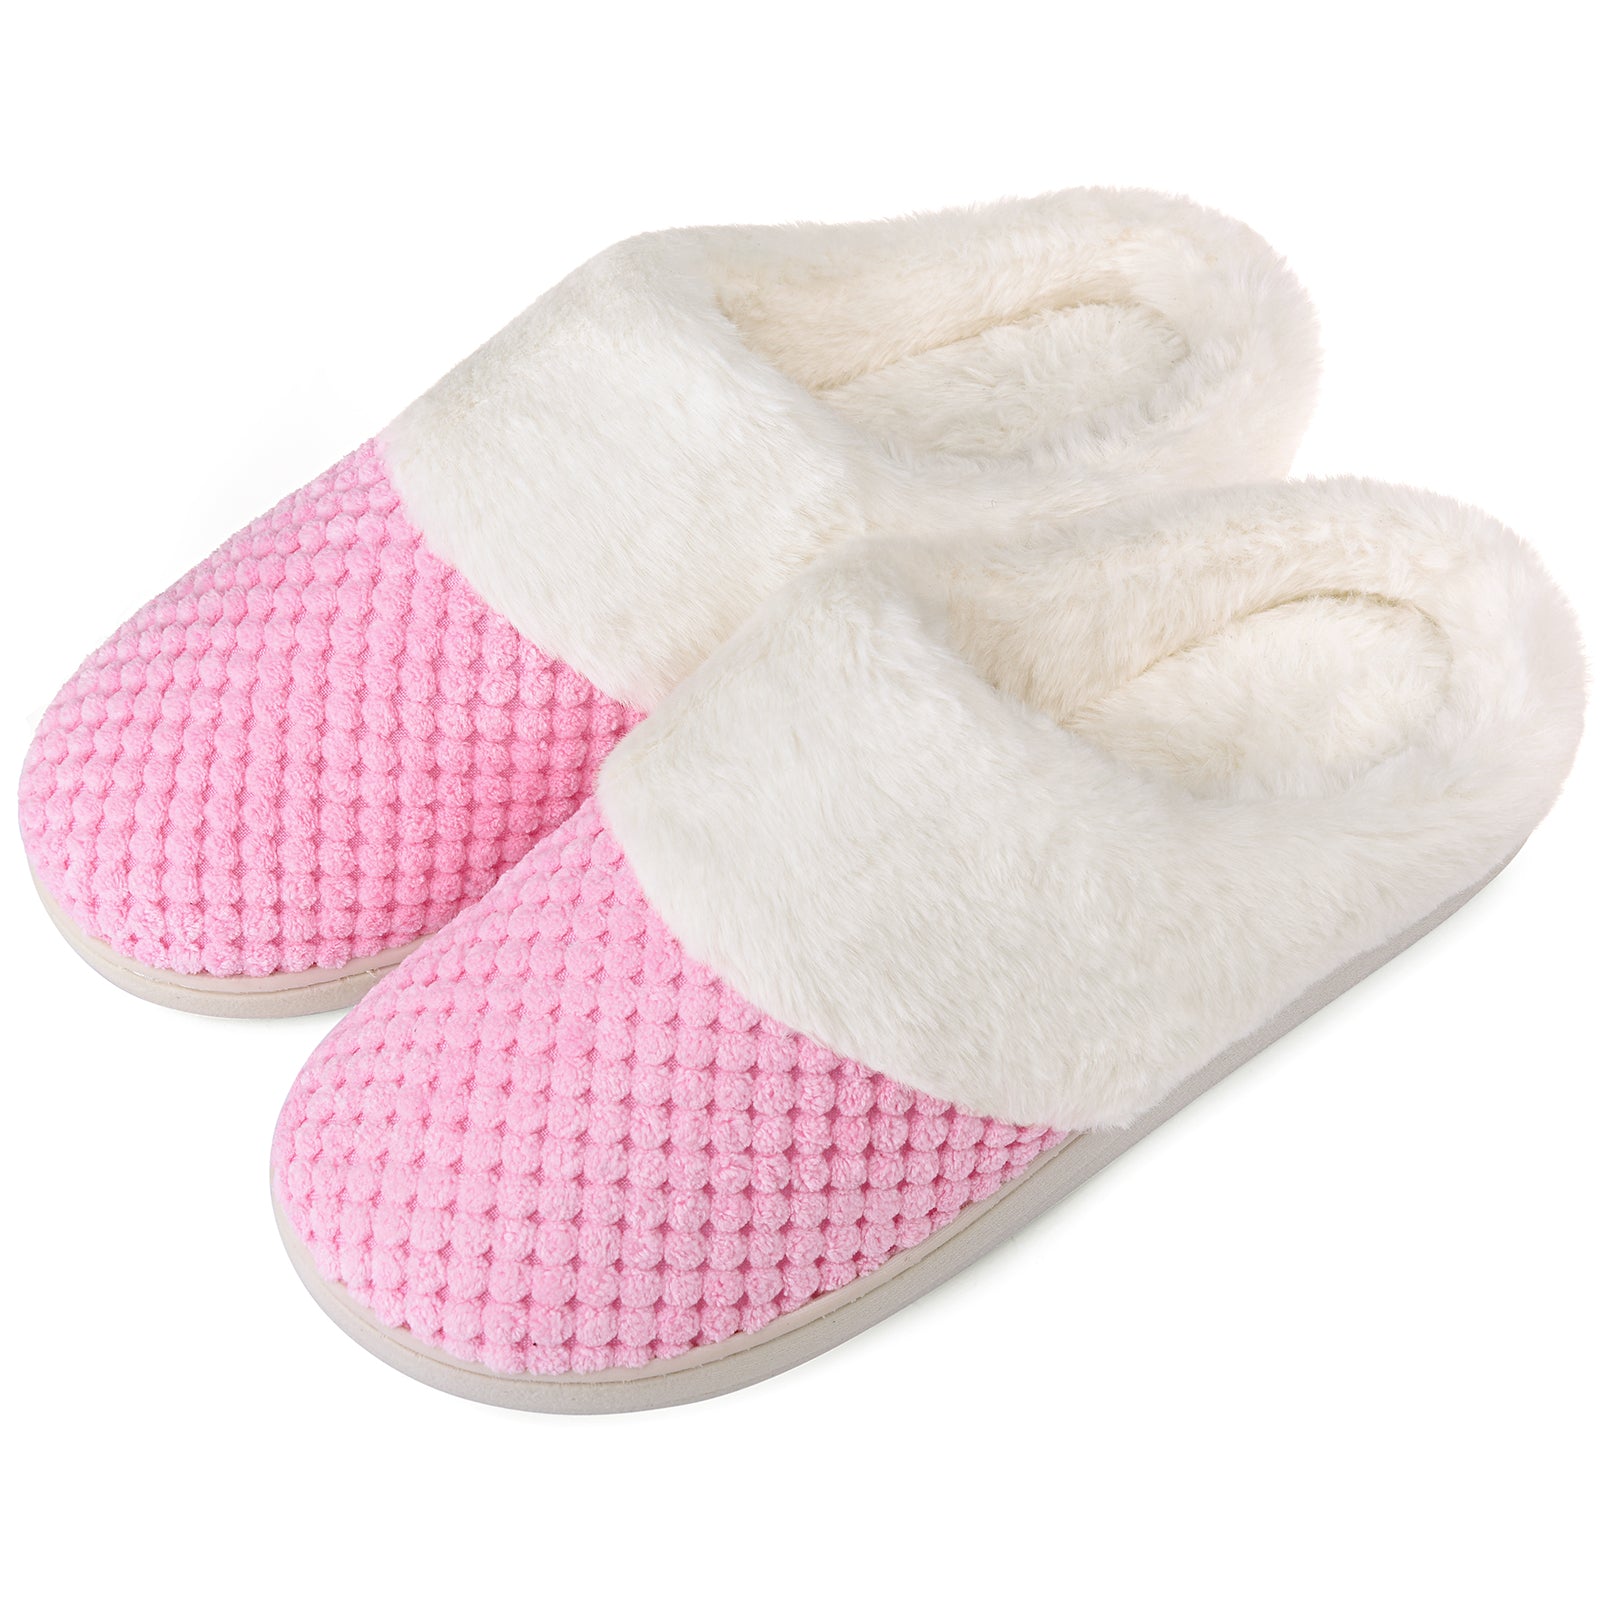 VONMAY Women's Slippers House Shoes Fleece Fuzzy Plush Lining Comfort